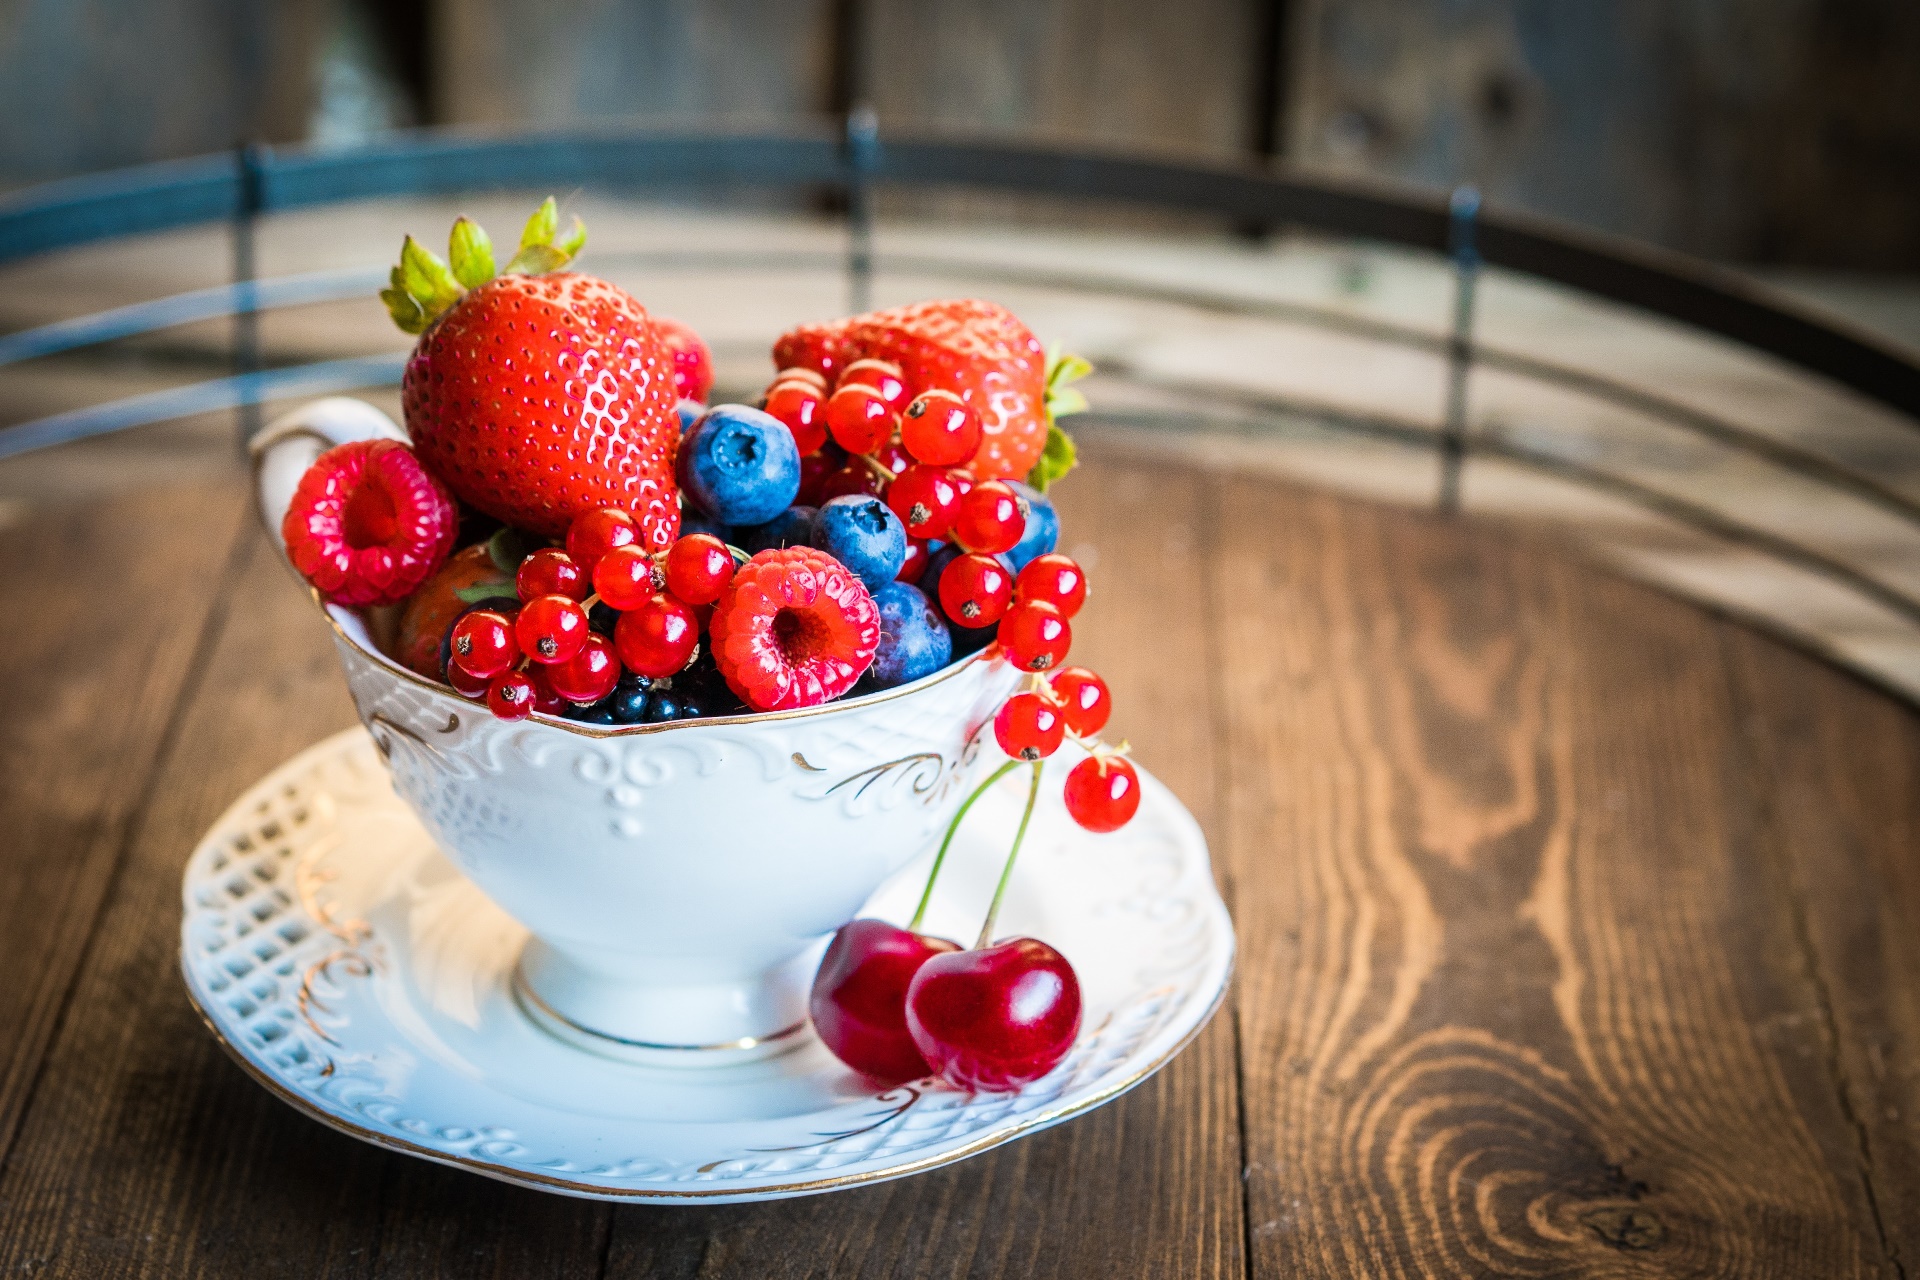 Colorful Cup Food Fruit Berries Strawberries Blueberries Red Currant Cherries Saucer Wooden Surface 1920x1280